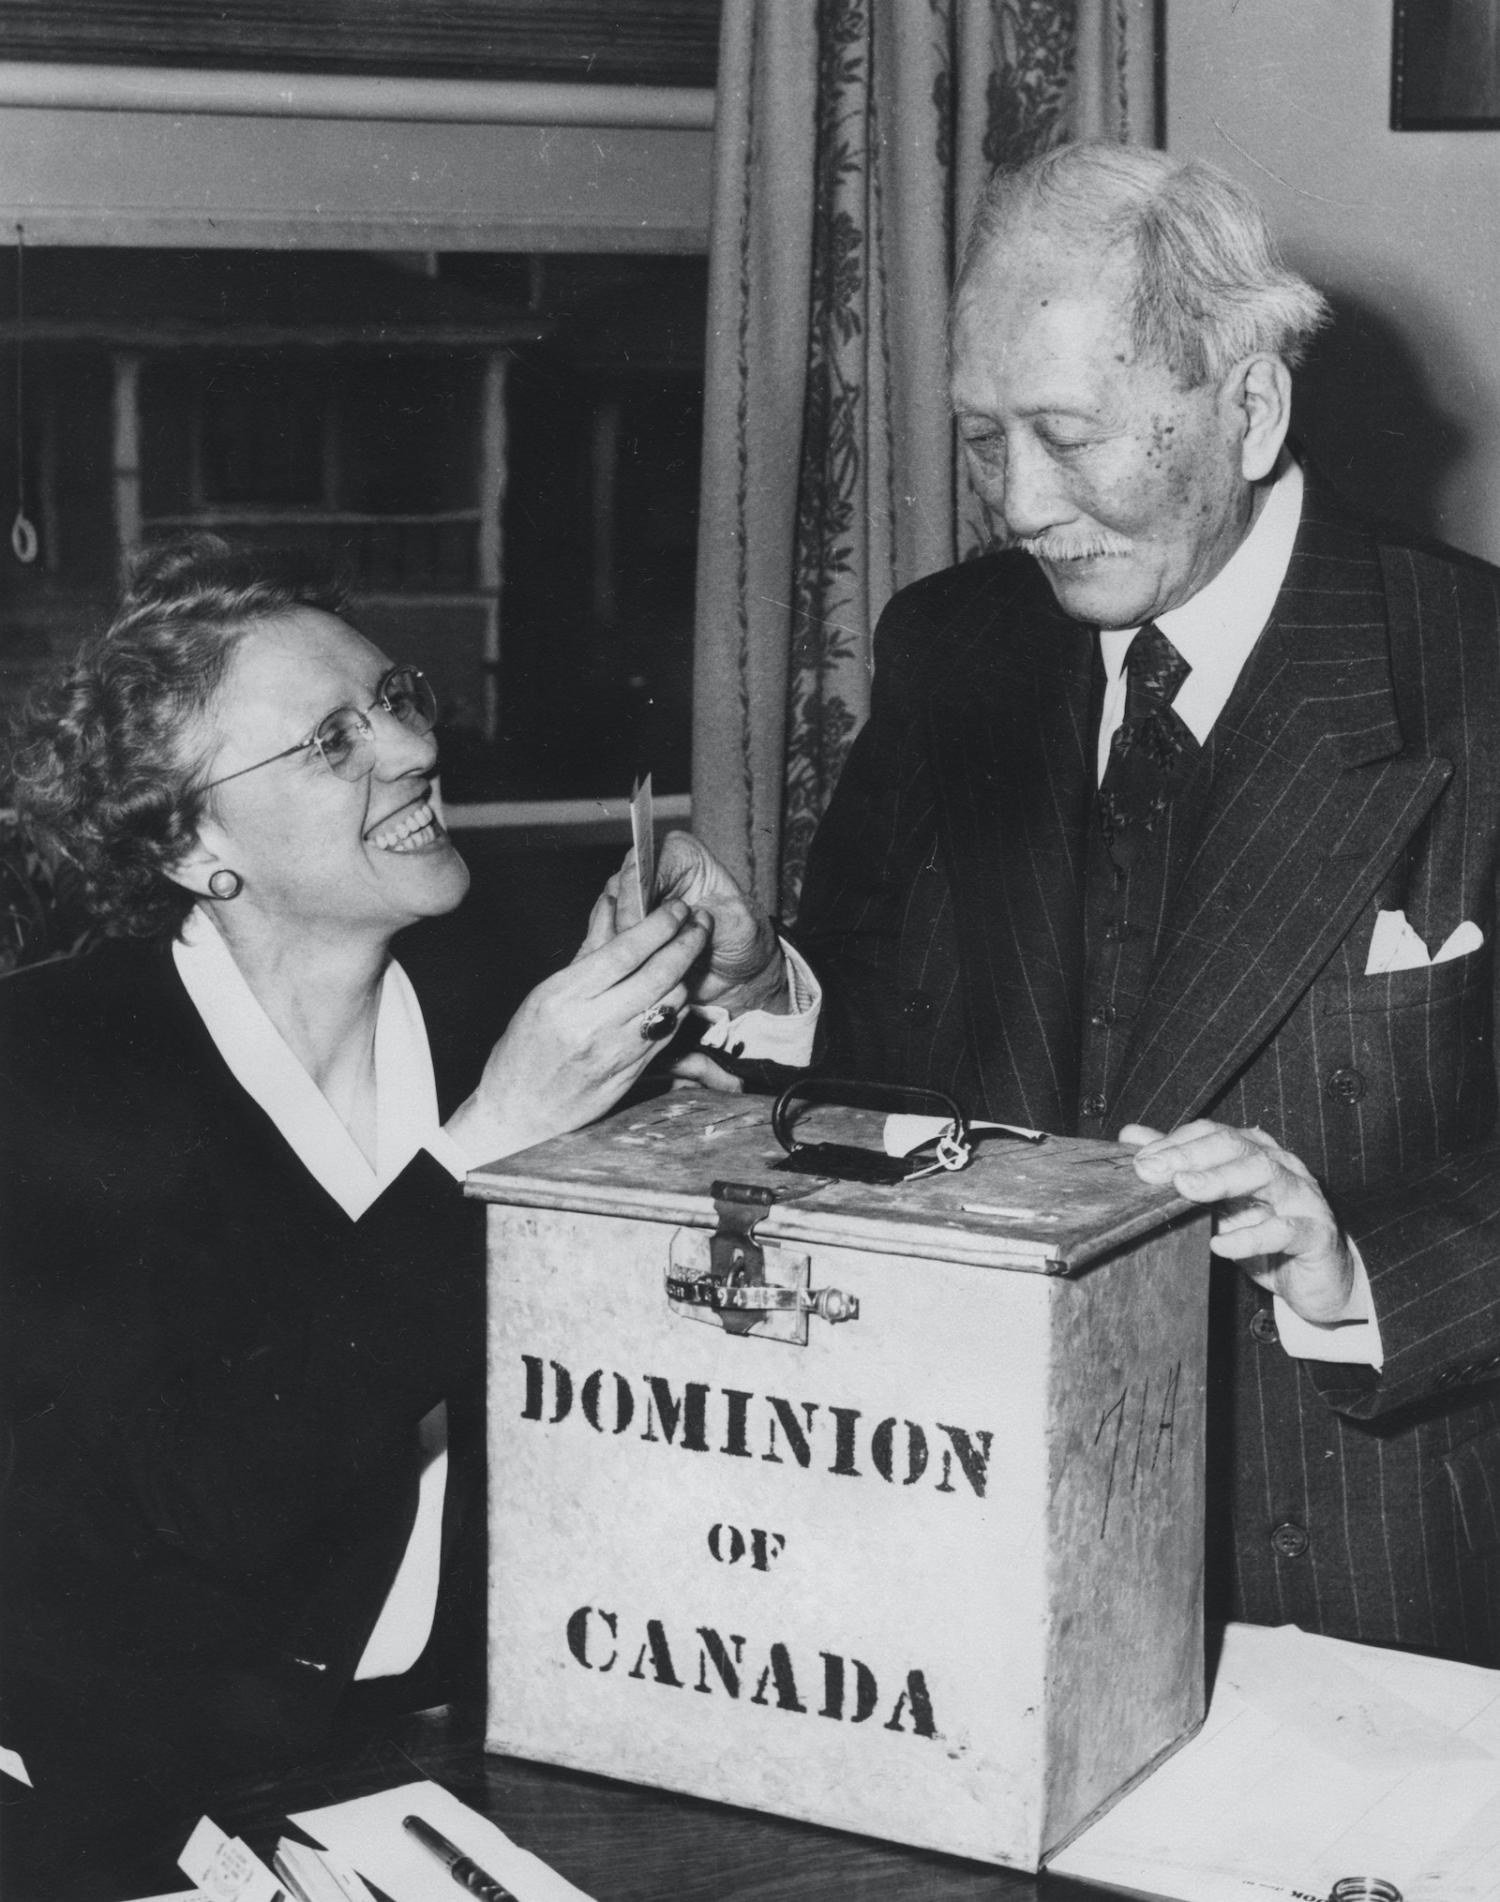 Won Alexander Cumyow, age 88, casting his ballot in the 1949 federal election.
